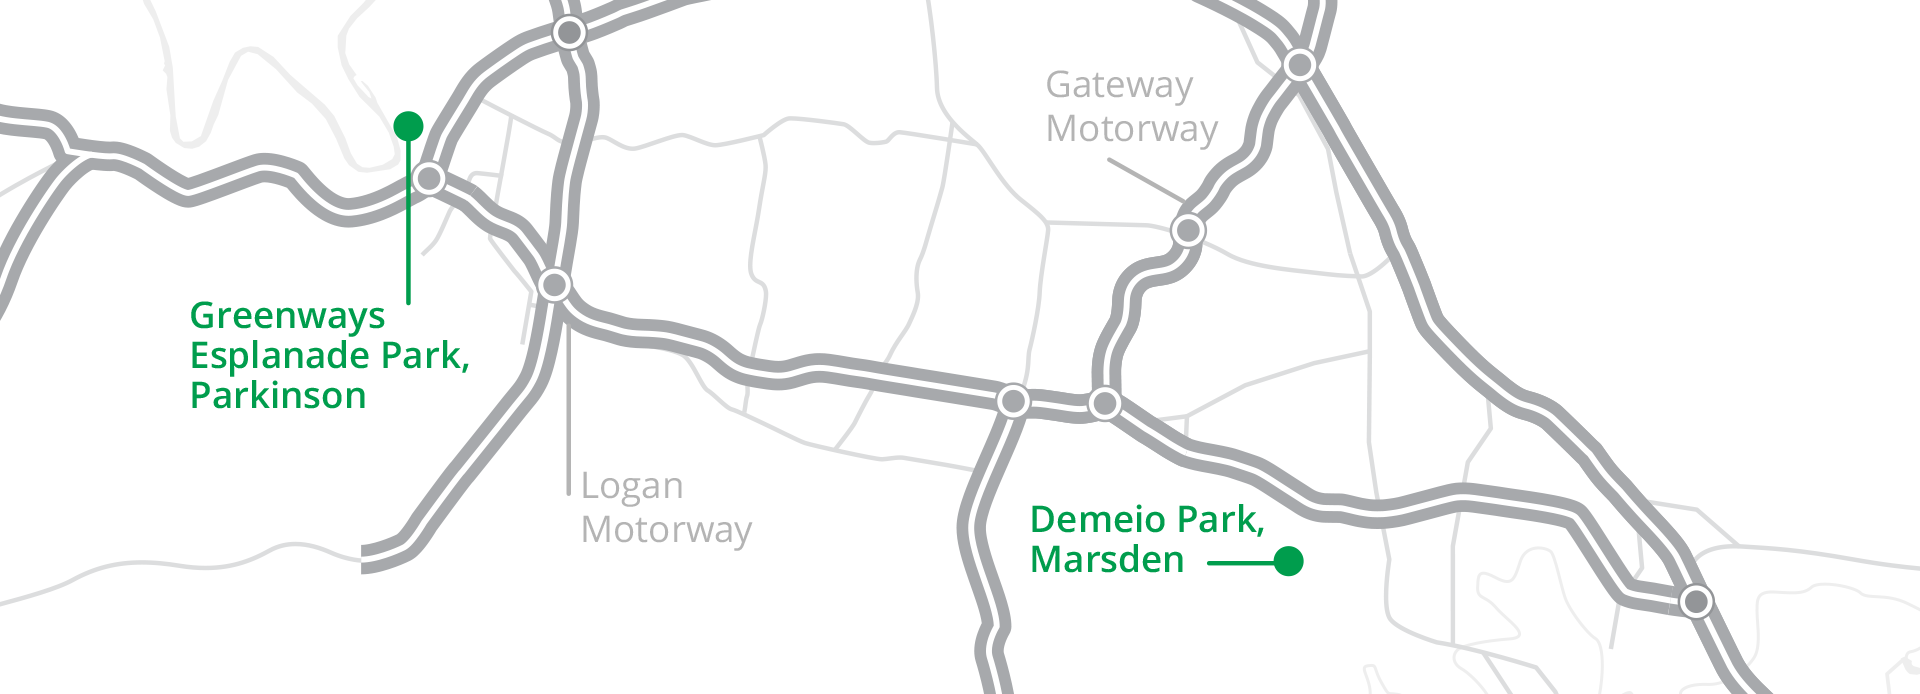 map showing the location of the two cycle parks